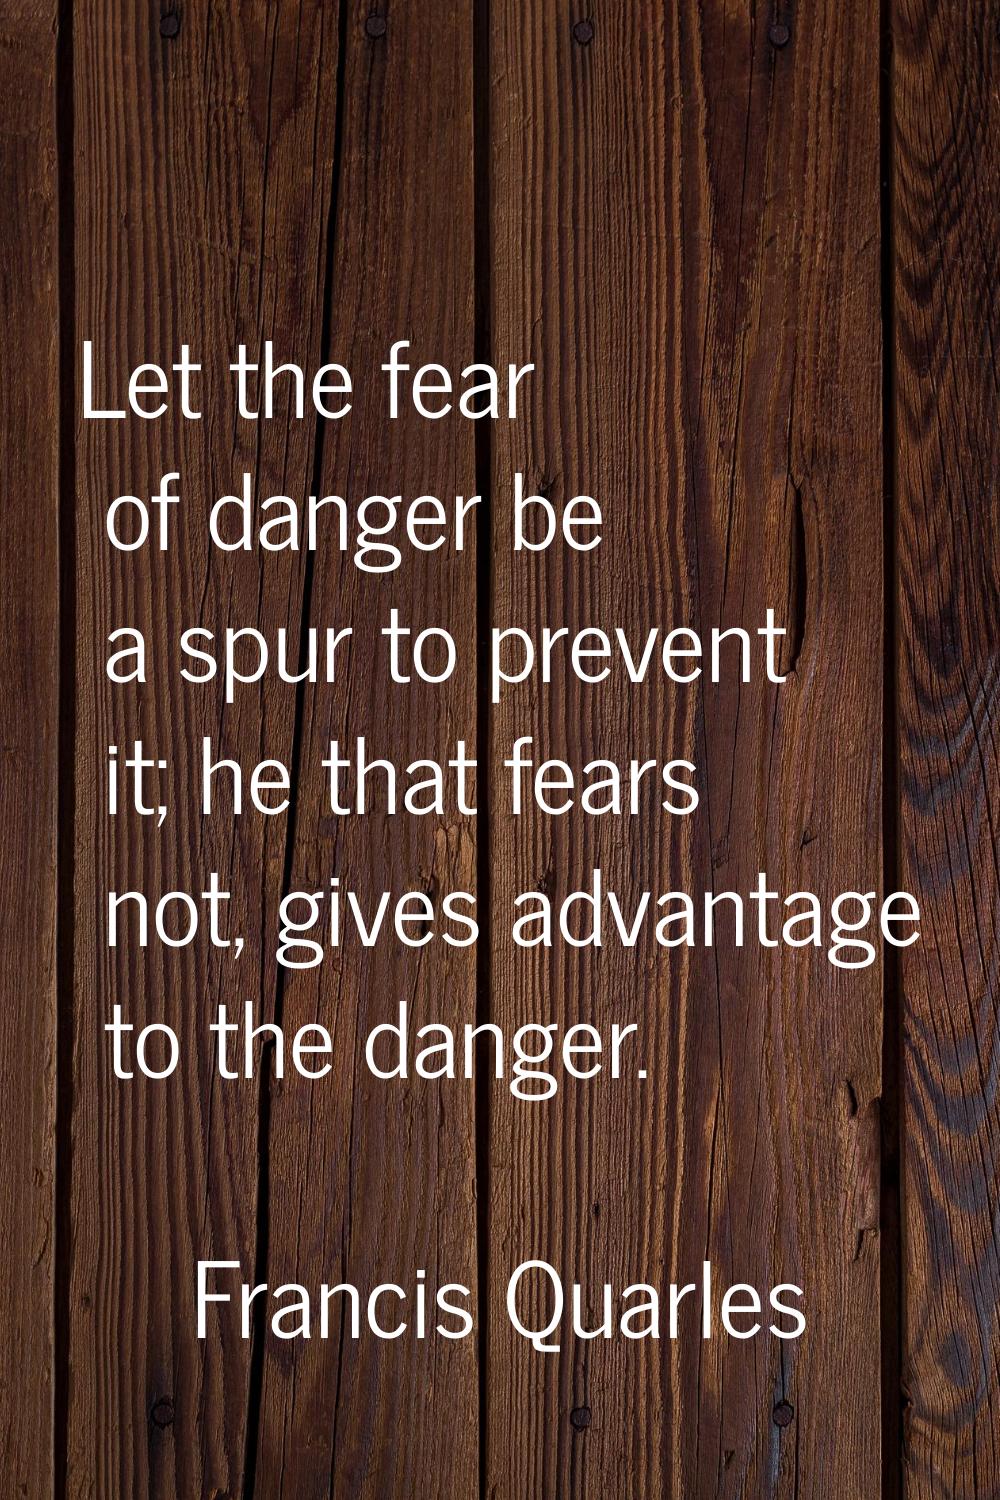 Let the fear of danger be a spur to prevent it; he that fears not, gives advantage to the danger.